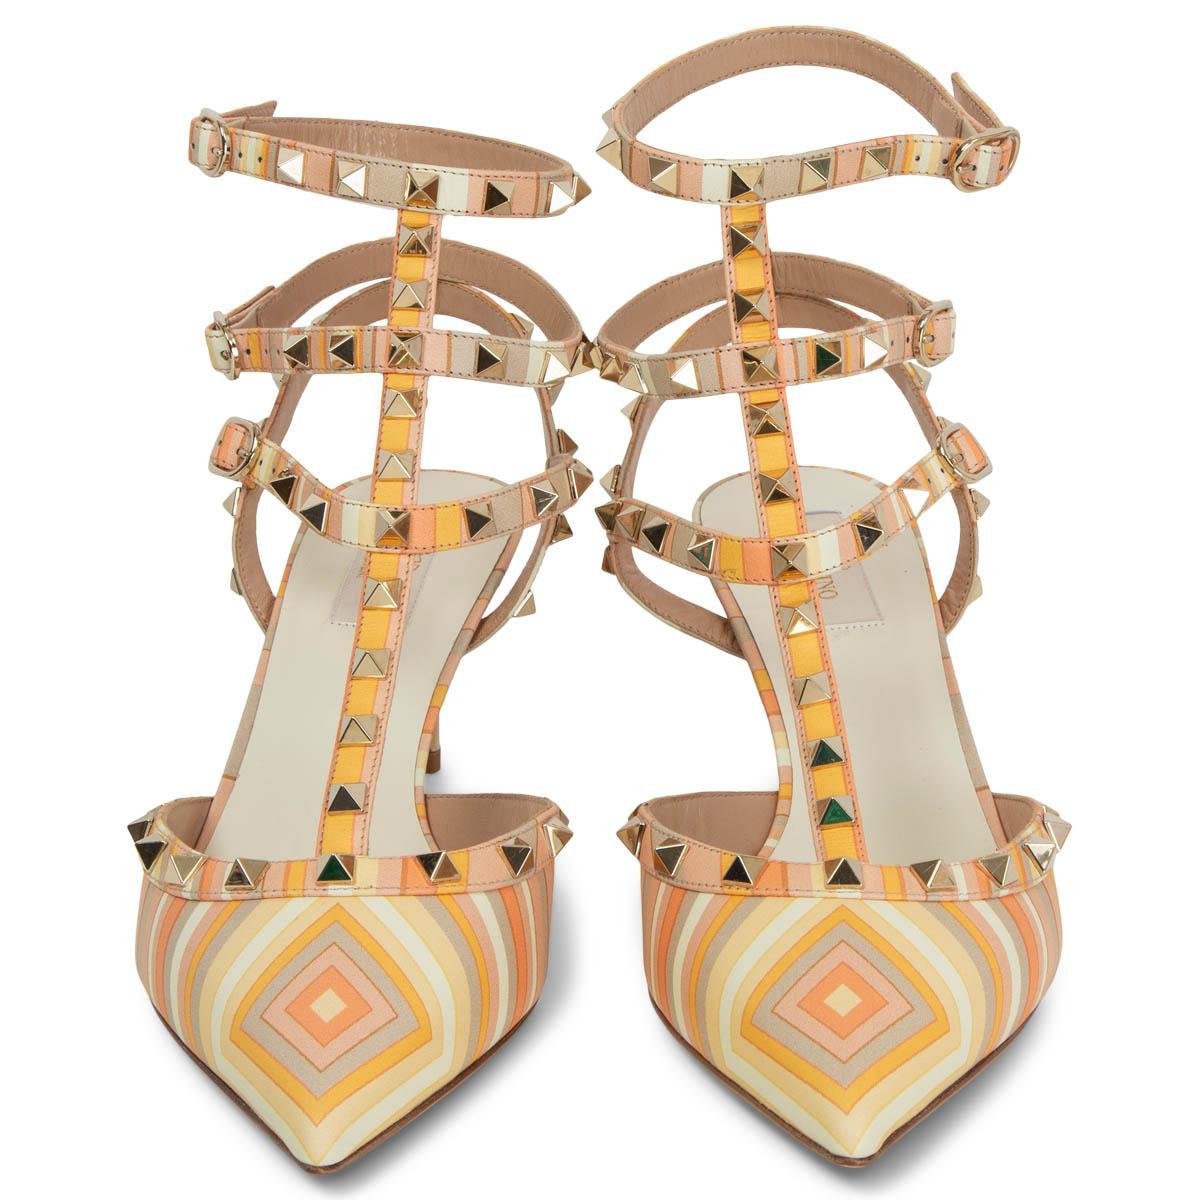 100% authentic Valentino Native Couture Rockstud 65 Ankle Strap Sandals in vanilla, salmon, orange and light taupe leather featuring signature gold-tone pyramid studs. Brand new. Come with dust bag. 

Measurements
Model	KW2S0375 VO7
Imprinted